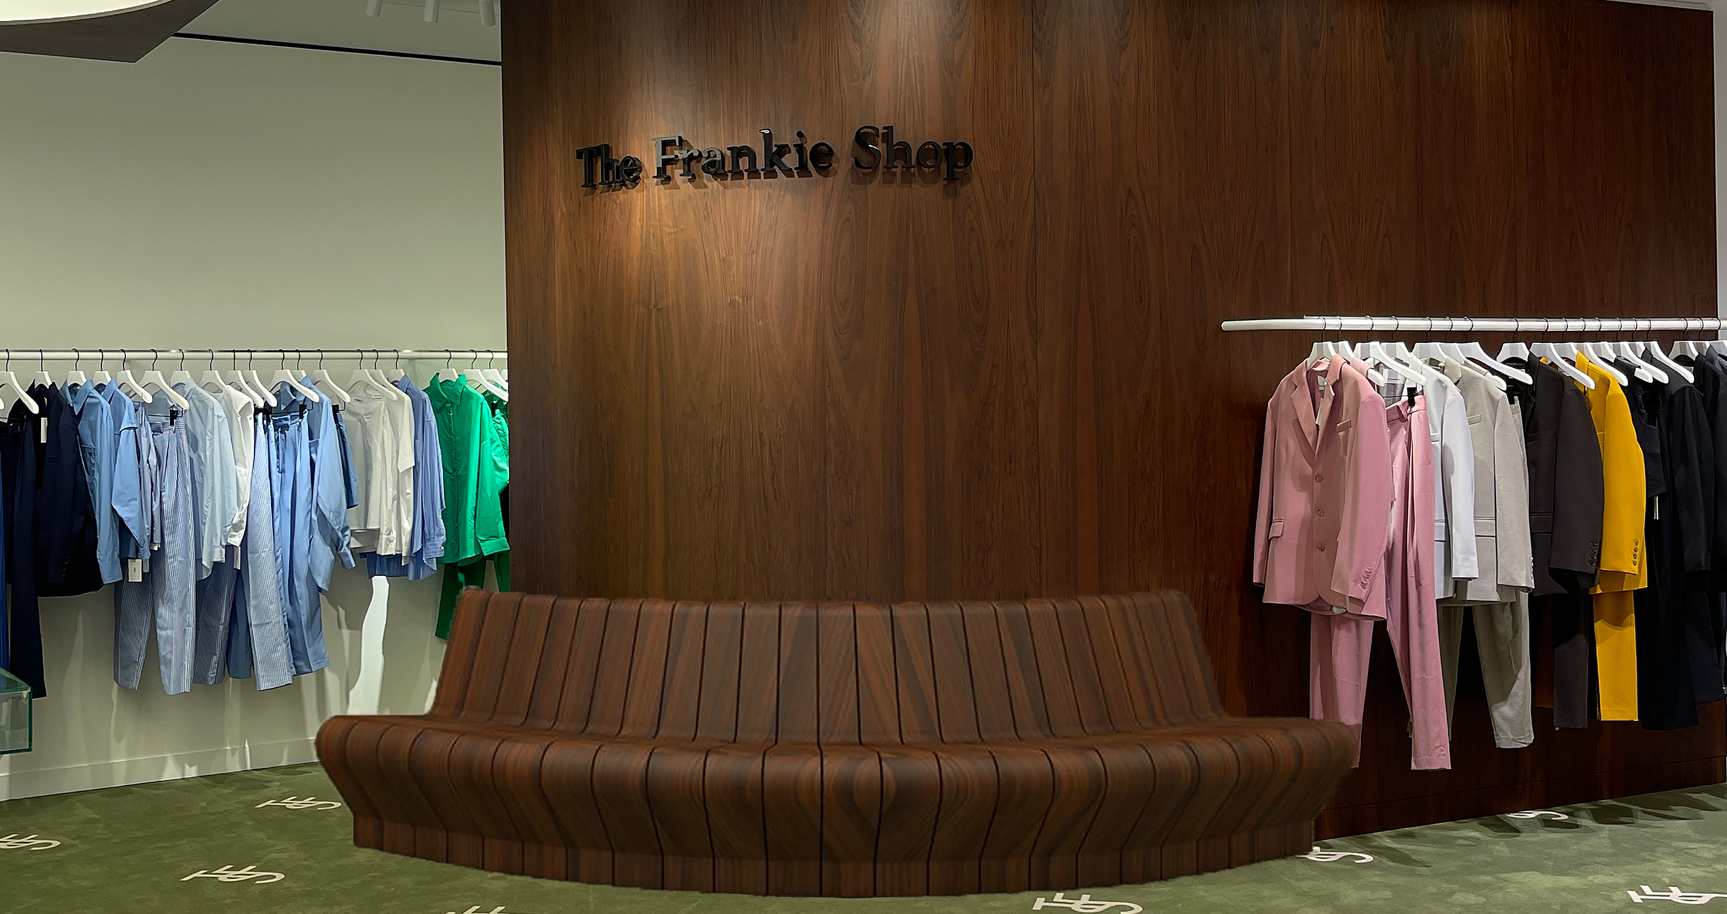 A view of the Frankie Shop Lafayette space captured by Chris Rhodes. 